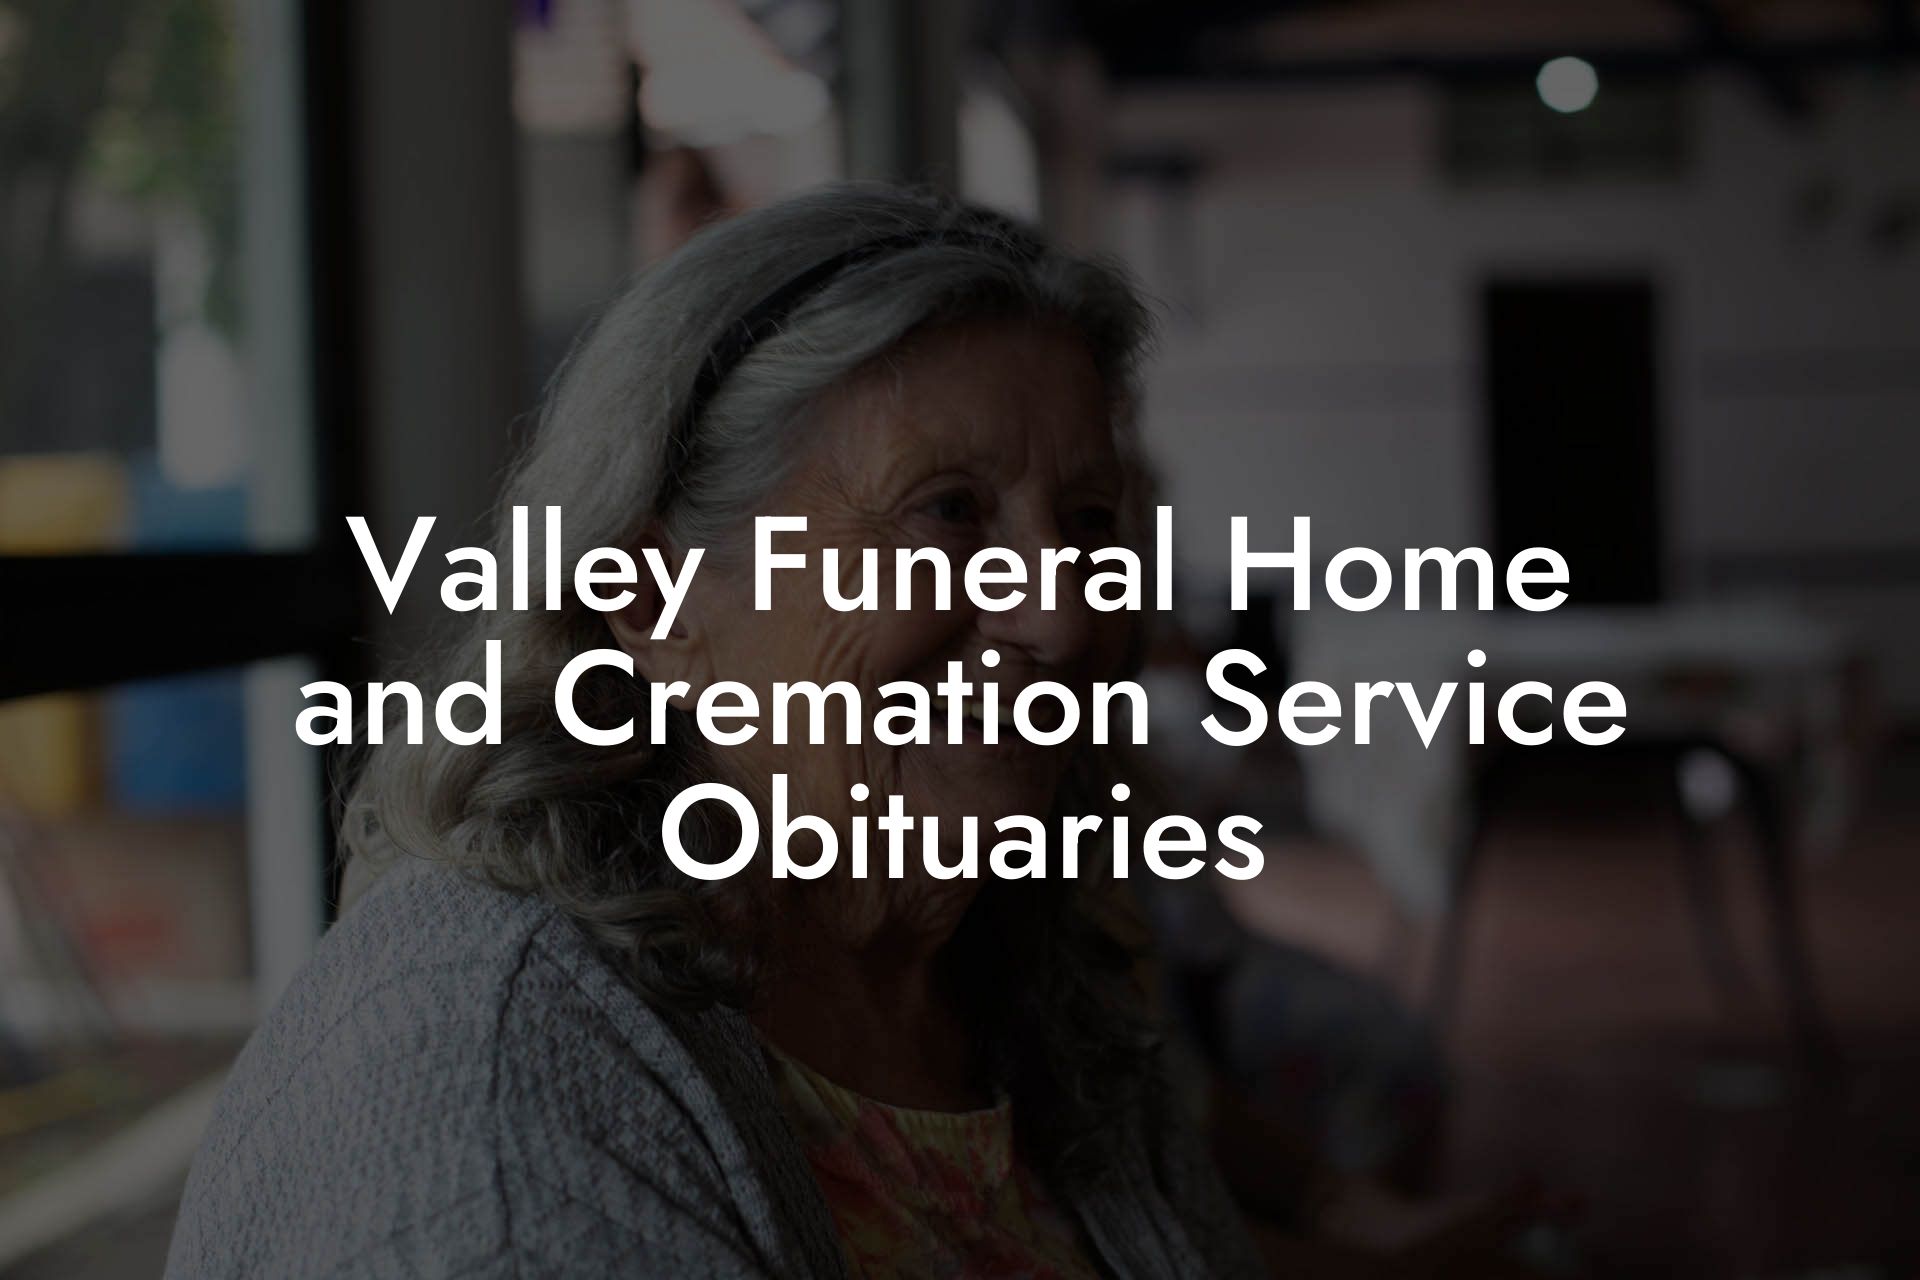 Valley Funeral Home and Cremation Service Obituaries - Eulogy Assistant